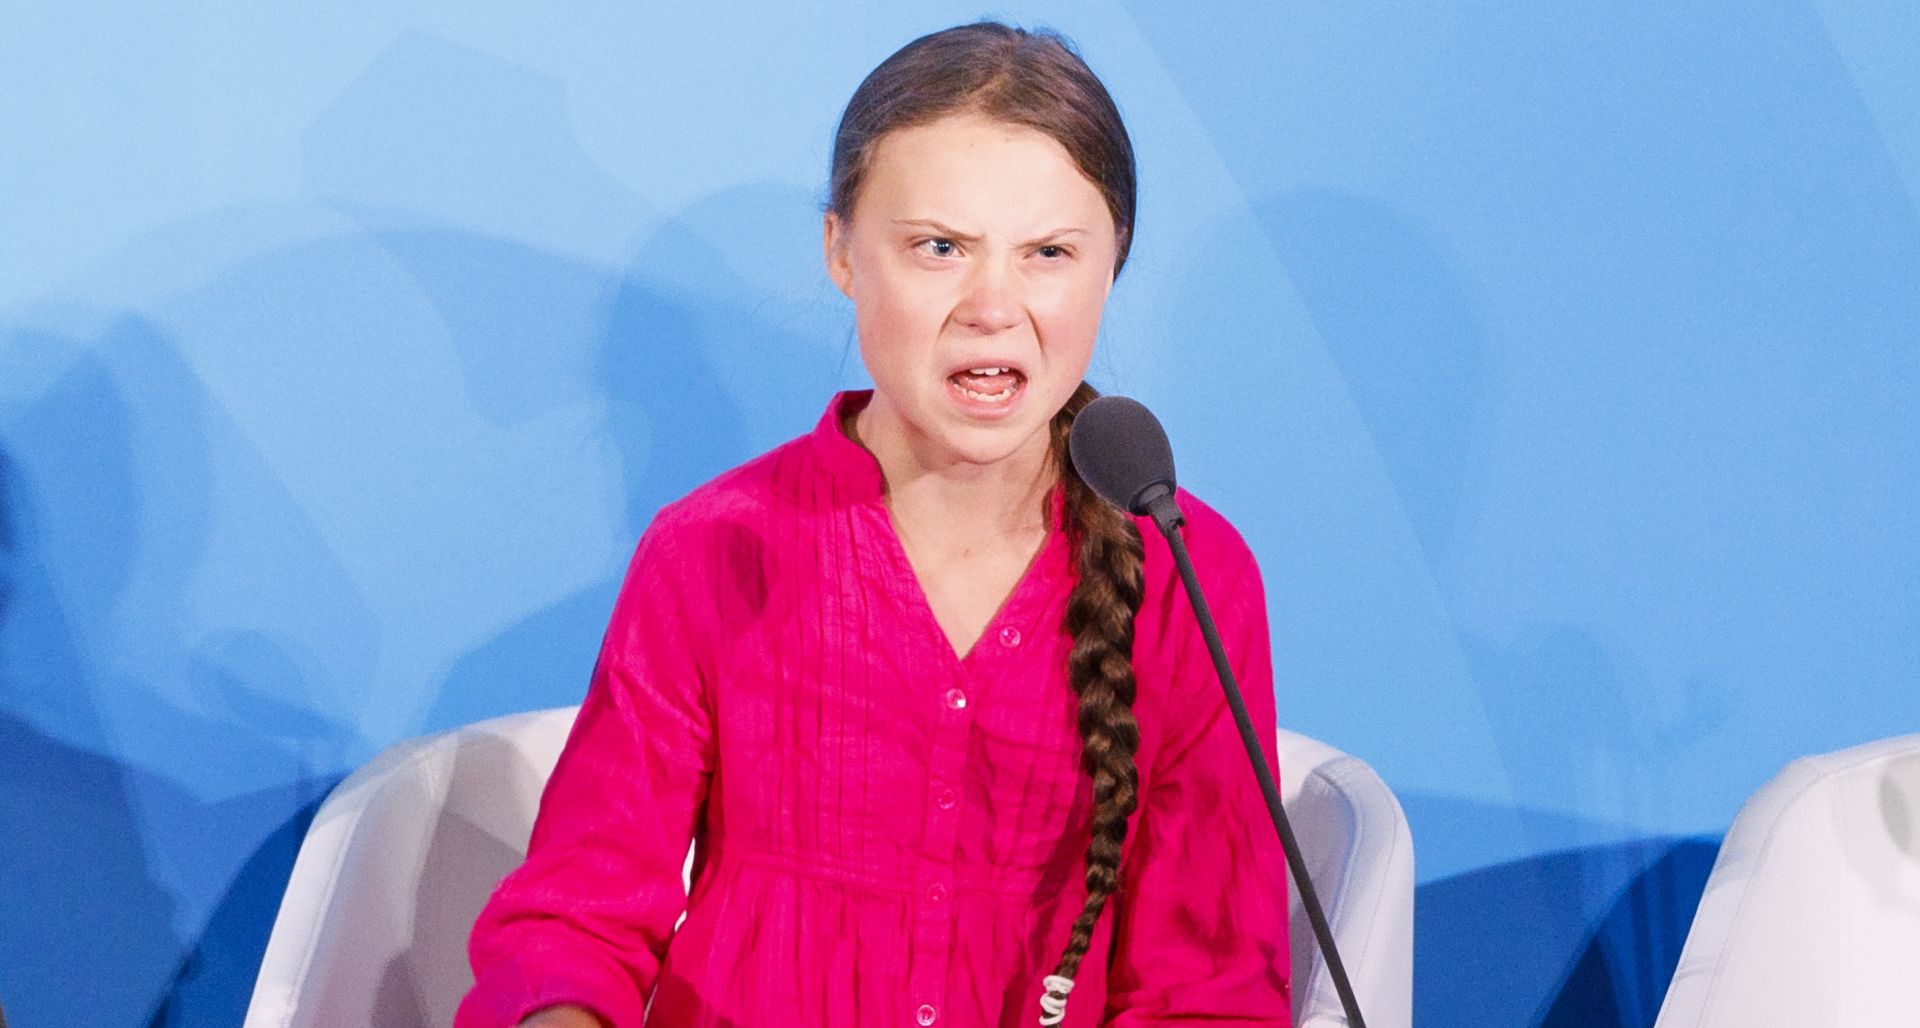 epaselect epa07864221 Greta Thunberg, the 16-years-old climate activist from Sweden, addresses world leaders at the start of the 2019 Climate Action Summit which is being held in advance of the General Debate of the General Assembly of the United Nations at United Nations Headquarters in New York, New York, USA, 23 September 2019. World Leaders have been invited to speak at the event, which was organized by the United Nations Secretary-General Antonio Guterres, for the purpose of proposing plans for addressing global climate change. The General Debate of the 74th session of the UN General Assembly begins on 24 September.  EPA/JUSTIN LANE